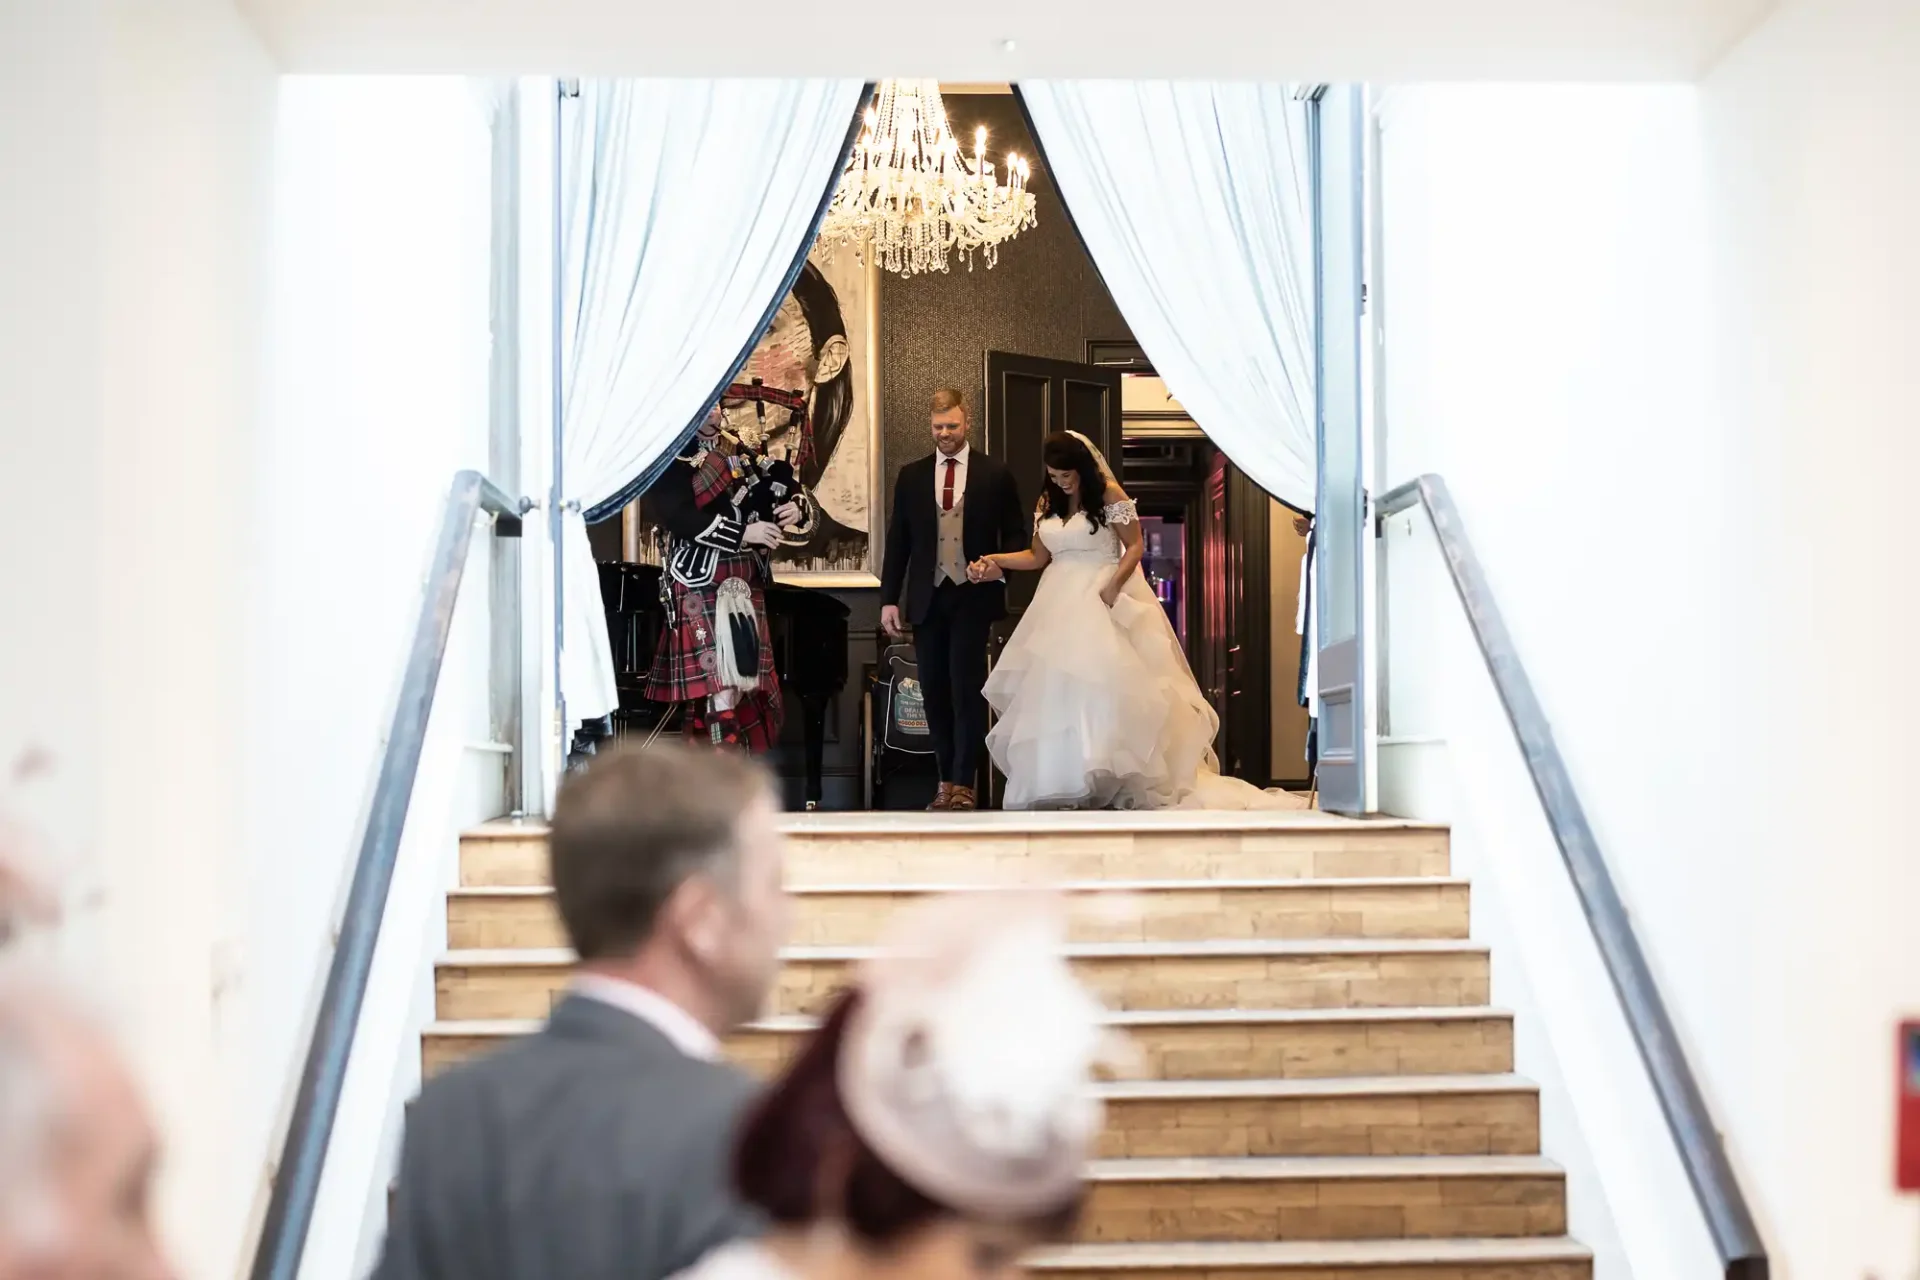 A bride and groom descend a staircase at a wedding venue, flanked by open curtains with a bagpiper in the background.